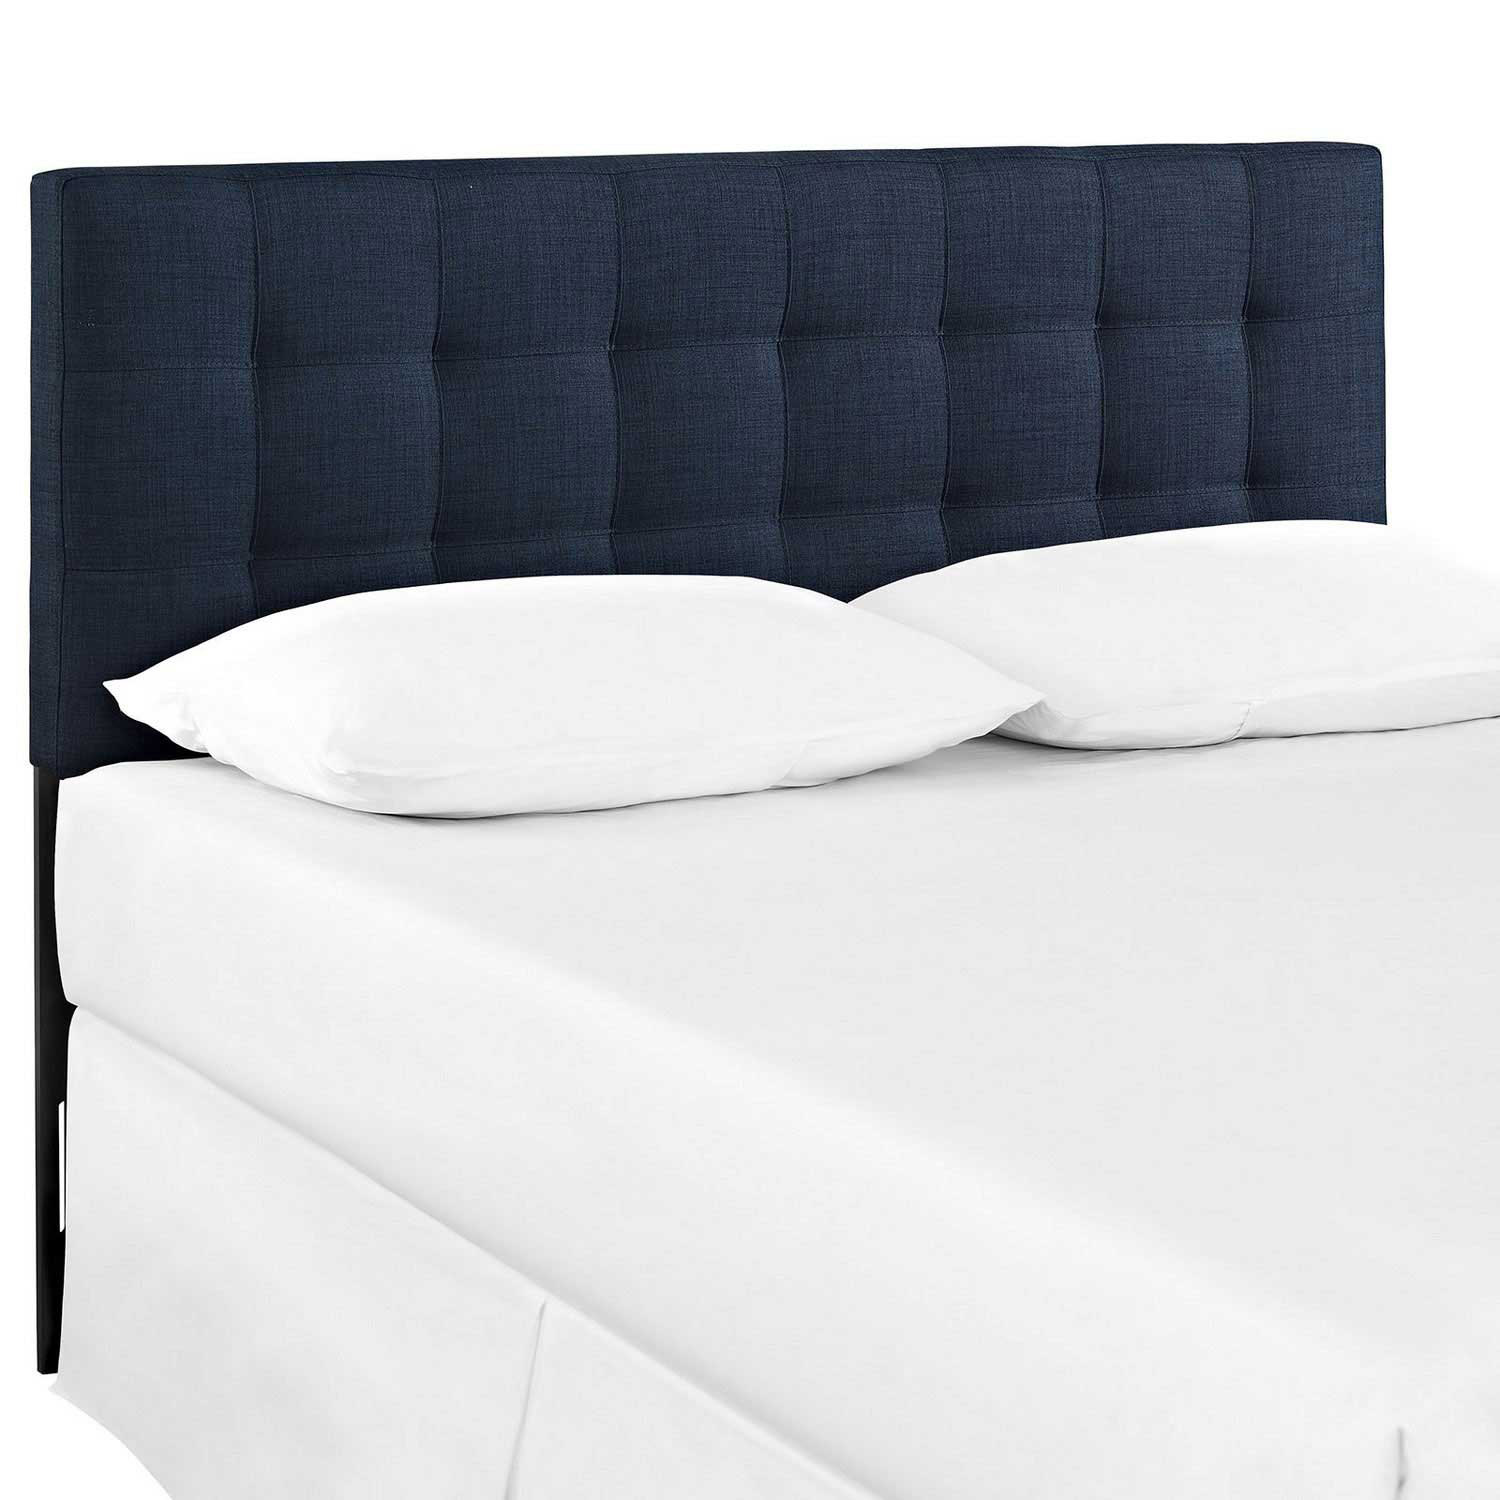 Modway Lily Queen Fabric Headboard - Navy